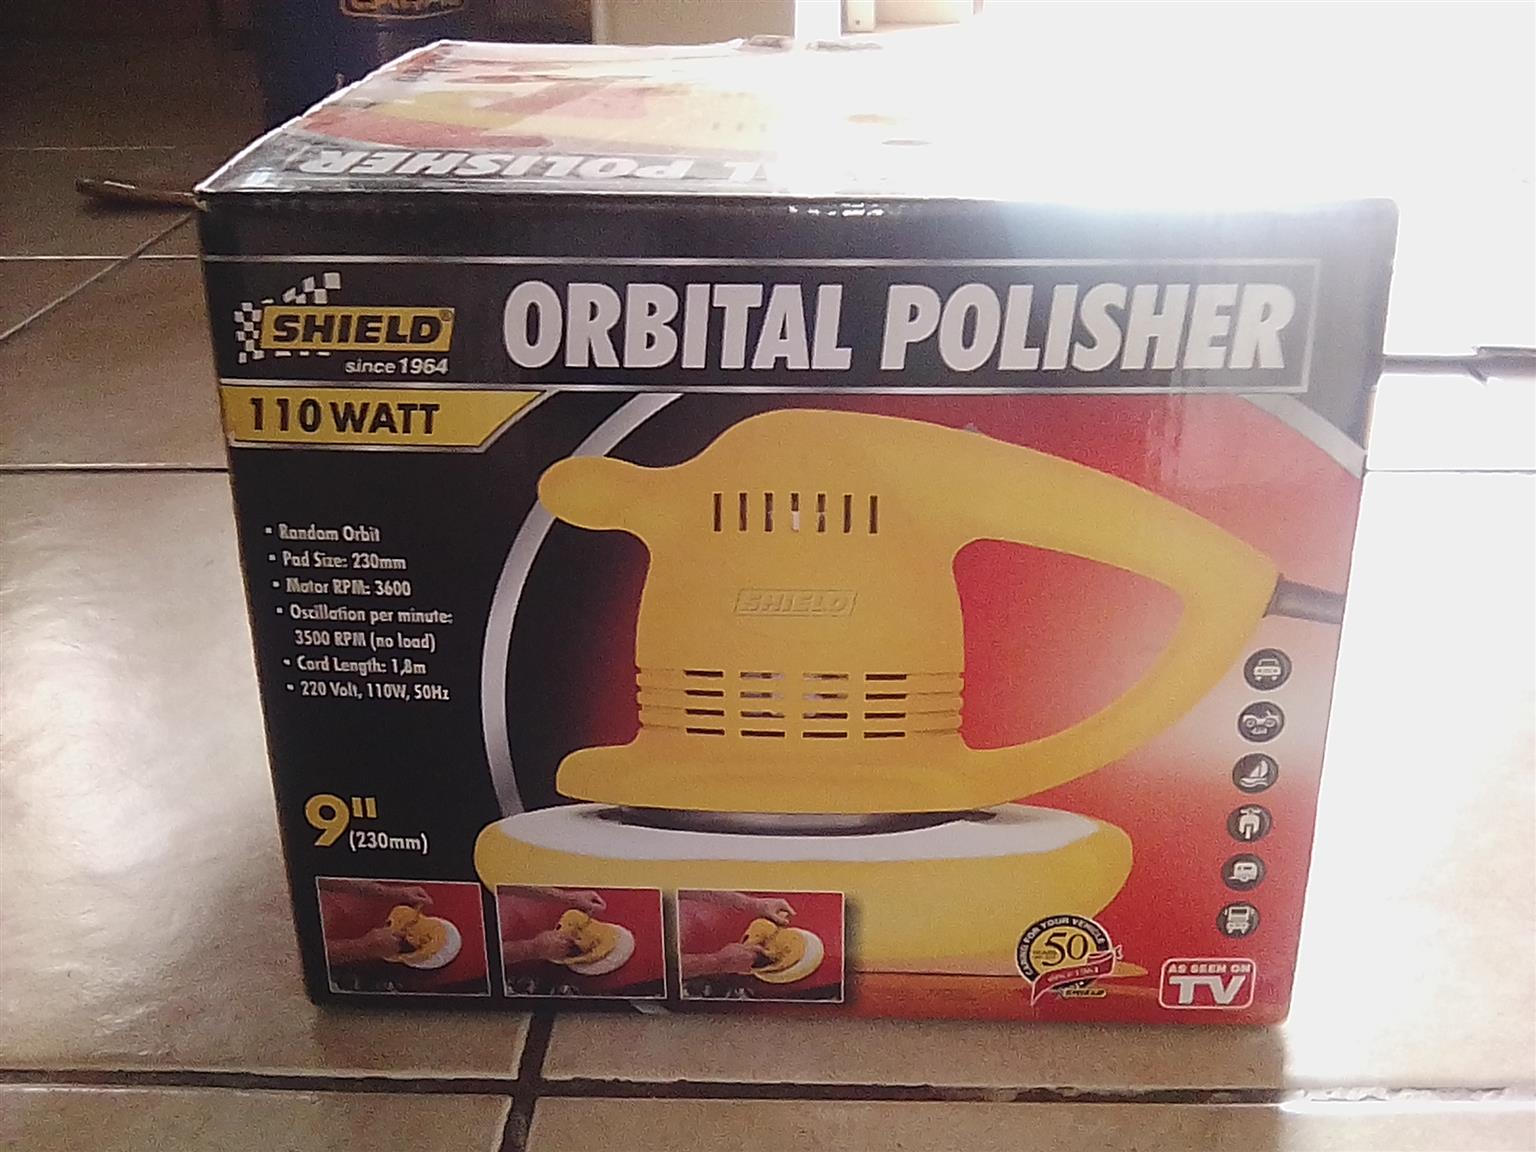 Orbital car polisher and accessories